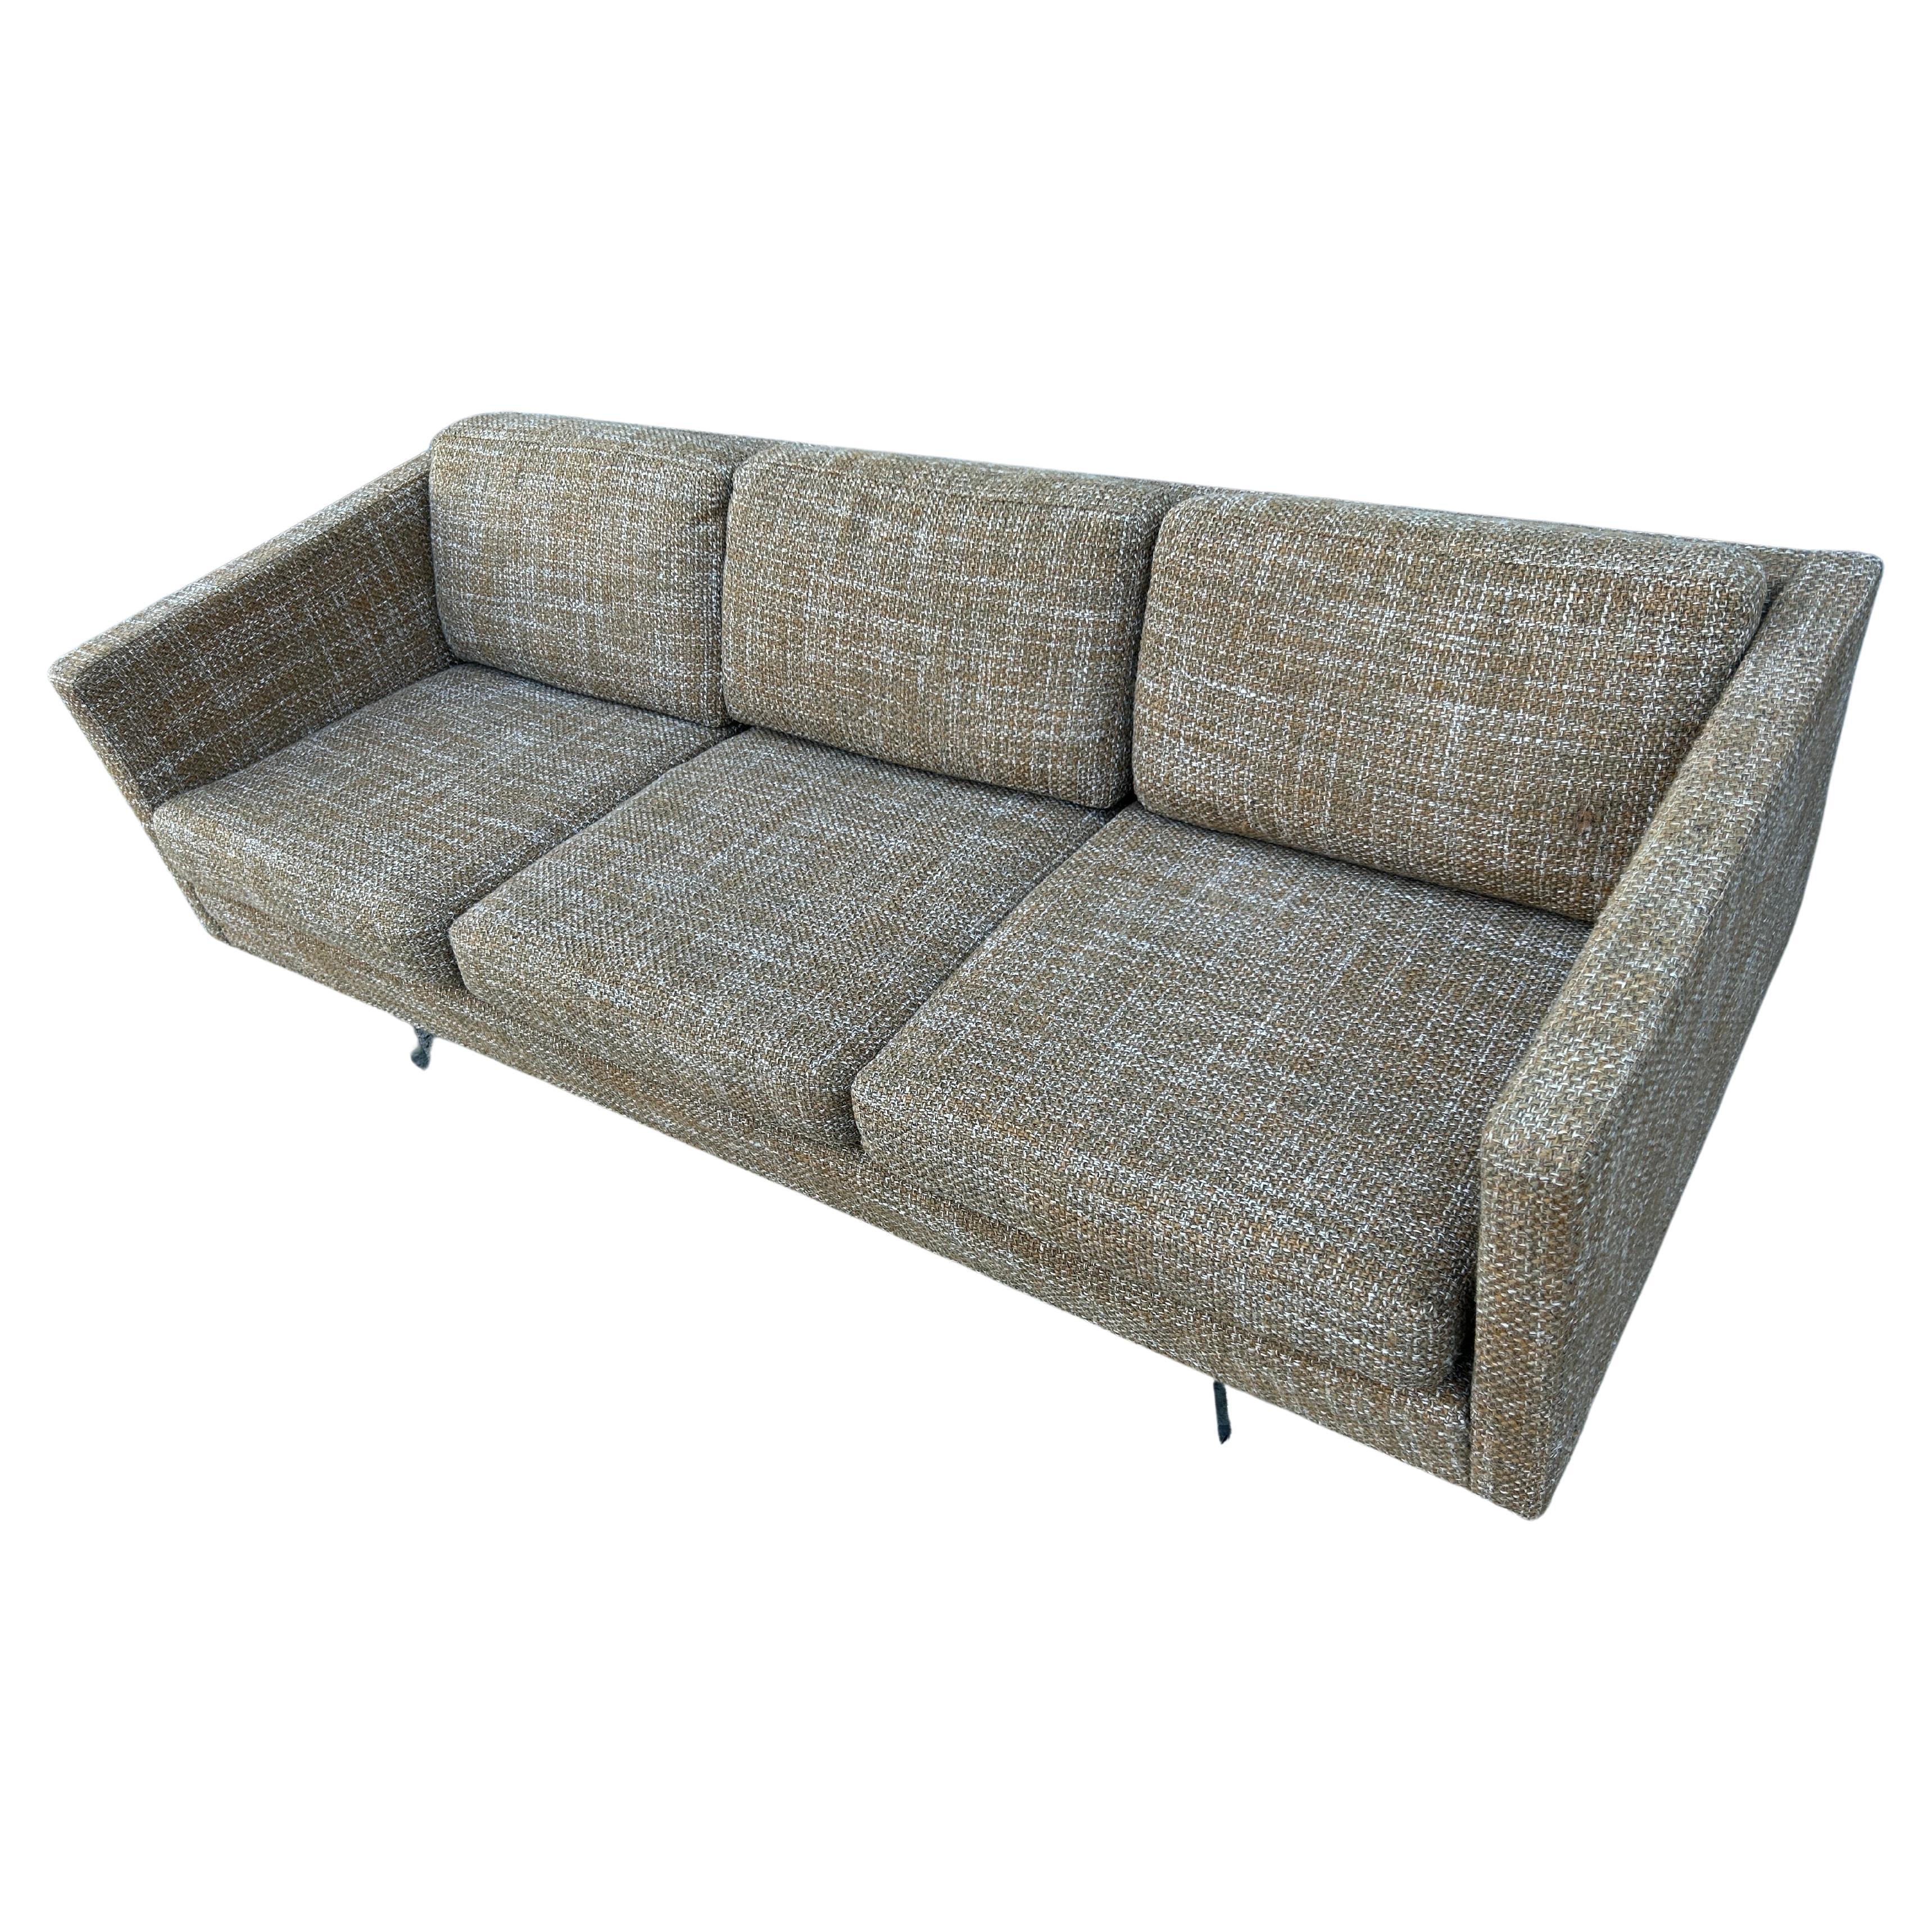 Mid-20th Century Mid-Century Danish Modern Cube 3 Seat Sofa in Brown Woven Upholstery For Sale